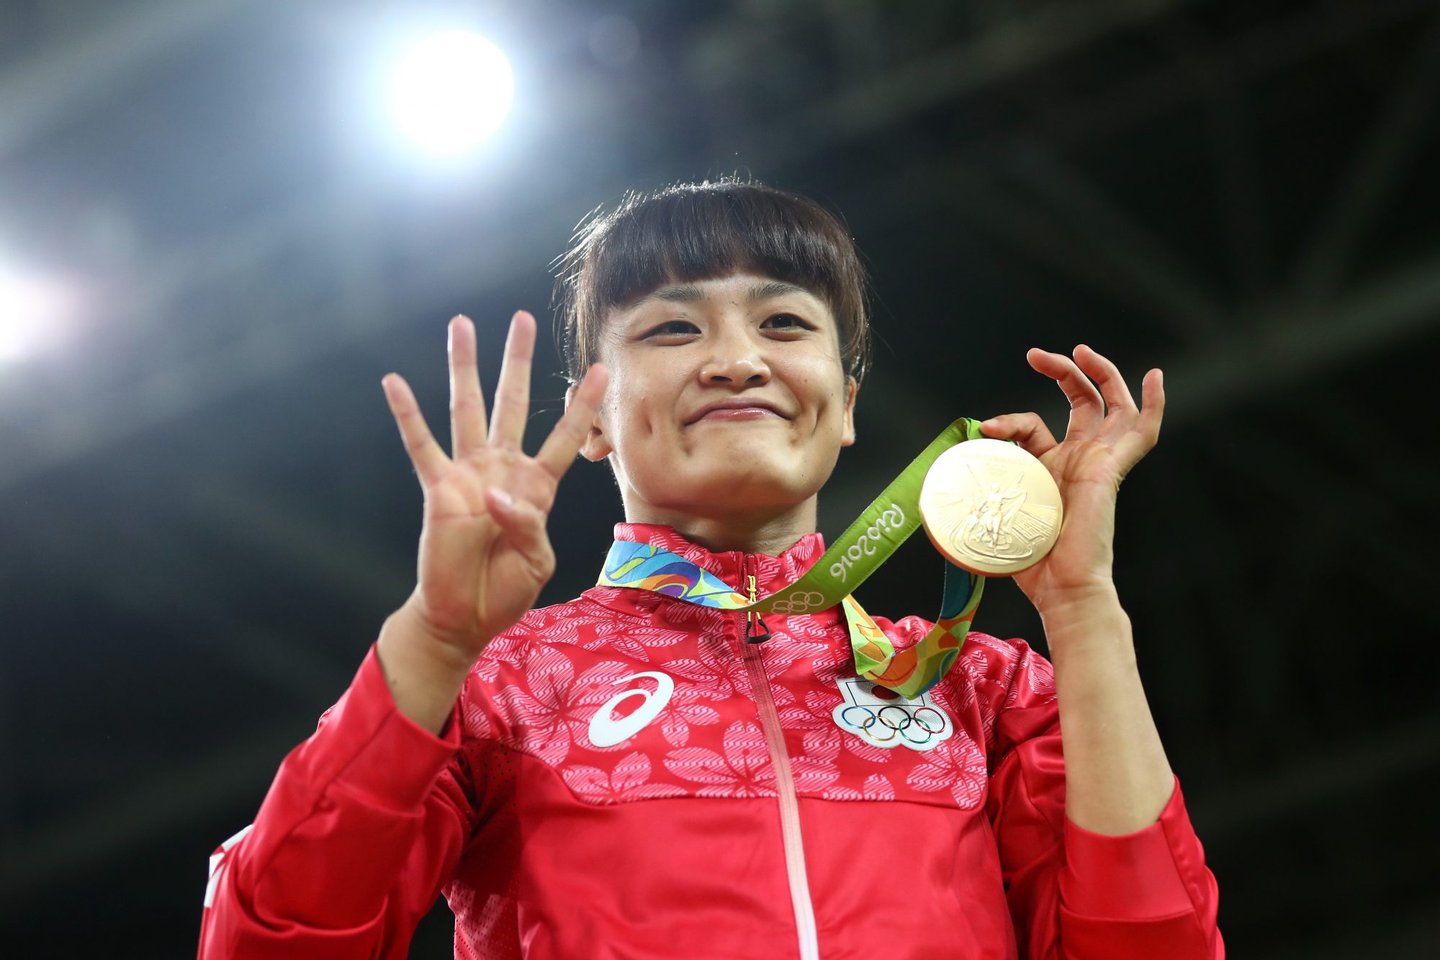 RIO DE JANEIRO, BRAZIL - AUGUST 17: Gold Medalist Kaori Icho of Japan celebrates during the medal ceremony after the Women's Freestyle 58 kg competition on Day 12 of the Rio 2016 Olympic Games at Caioca Arena 2 on August 17, 2016 in Rio de Janeiro, Brazil. (Photo by Lars Baron/Getty Images)